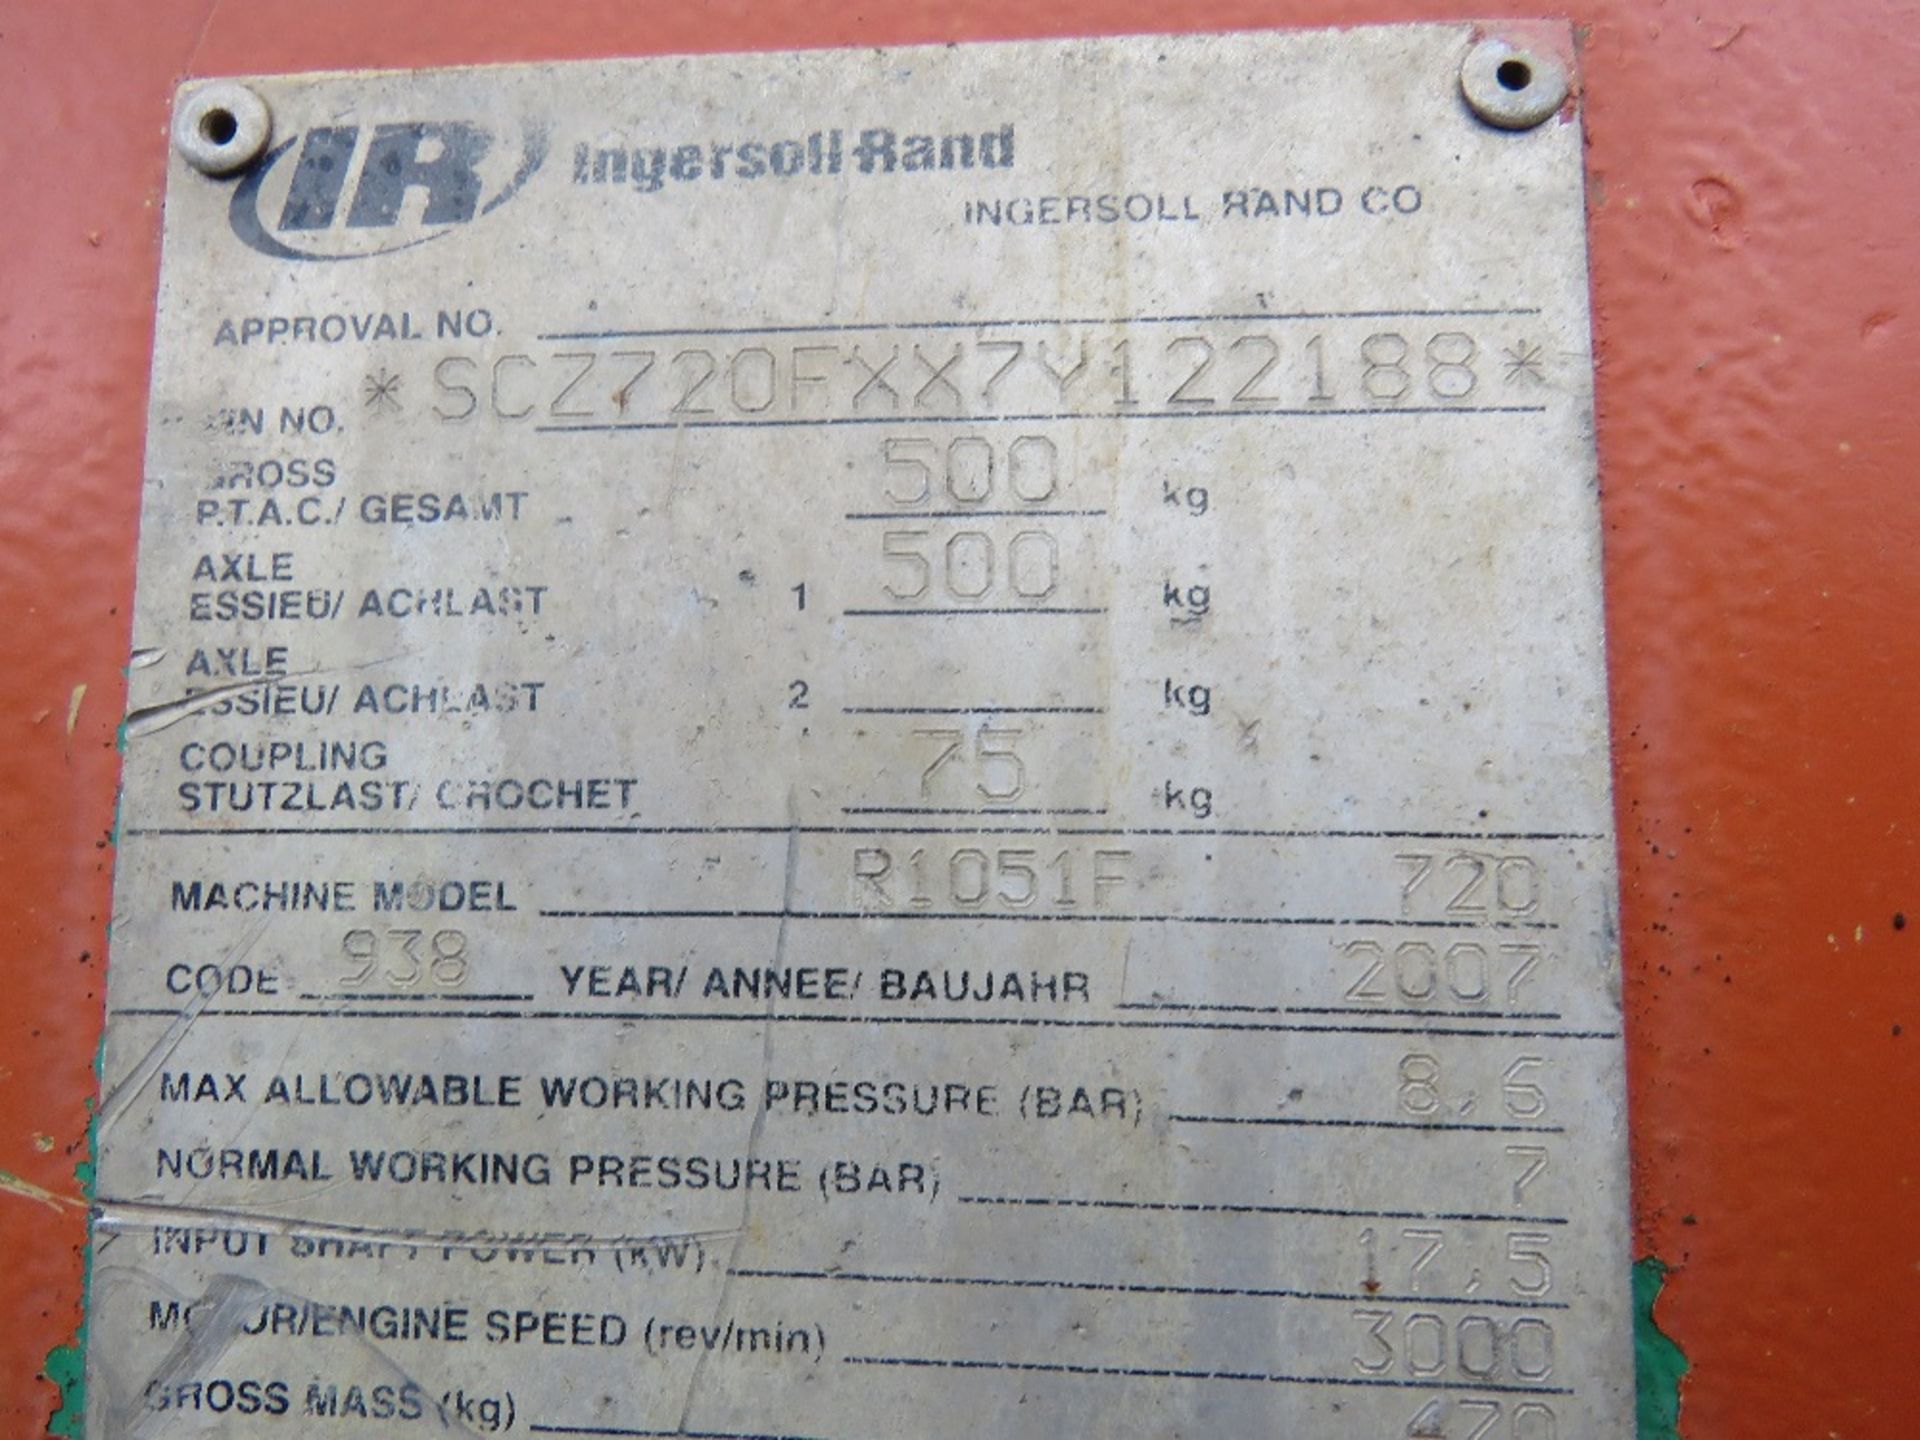 INGERSOLL RAND 720 TOWED ROAD COMPRESSOR. KUBOTA ENGINE. BEEN IN LONG TERM STORAGE, UNTESTED, CONDIT - Image 5 of 9